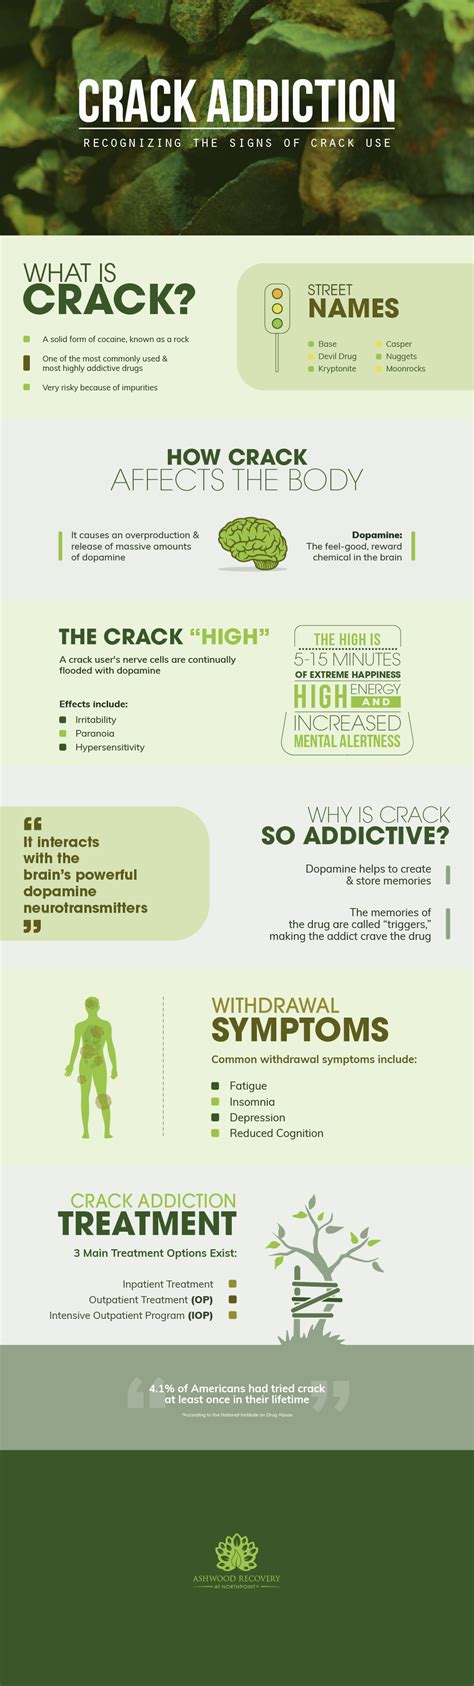 Crack Abuse Addiction And Treatment For Recovery In Id